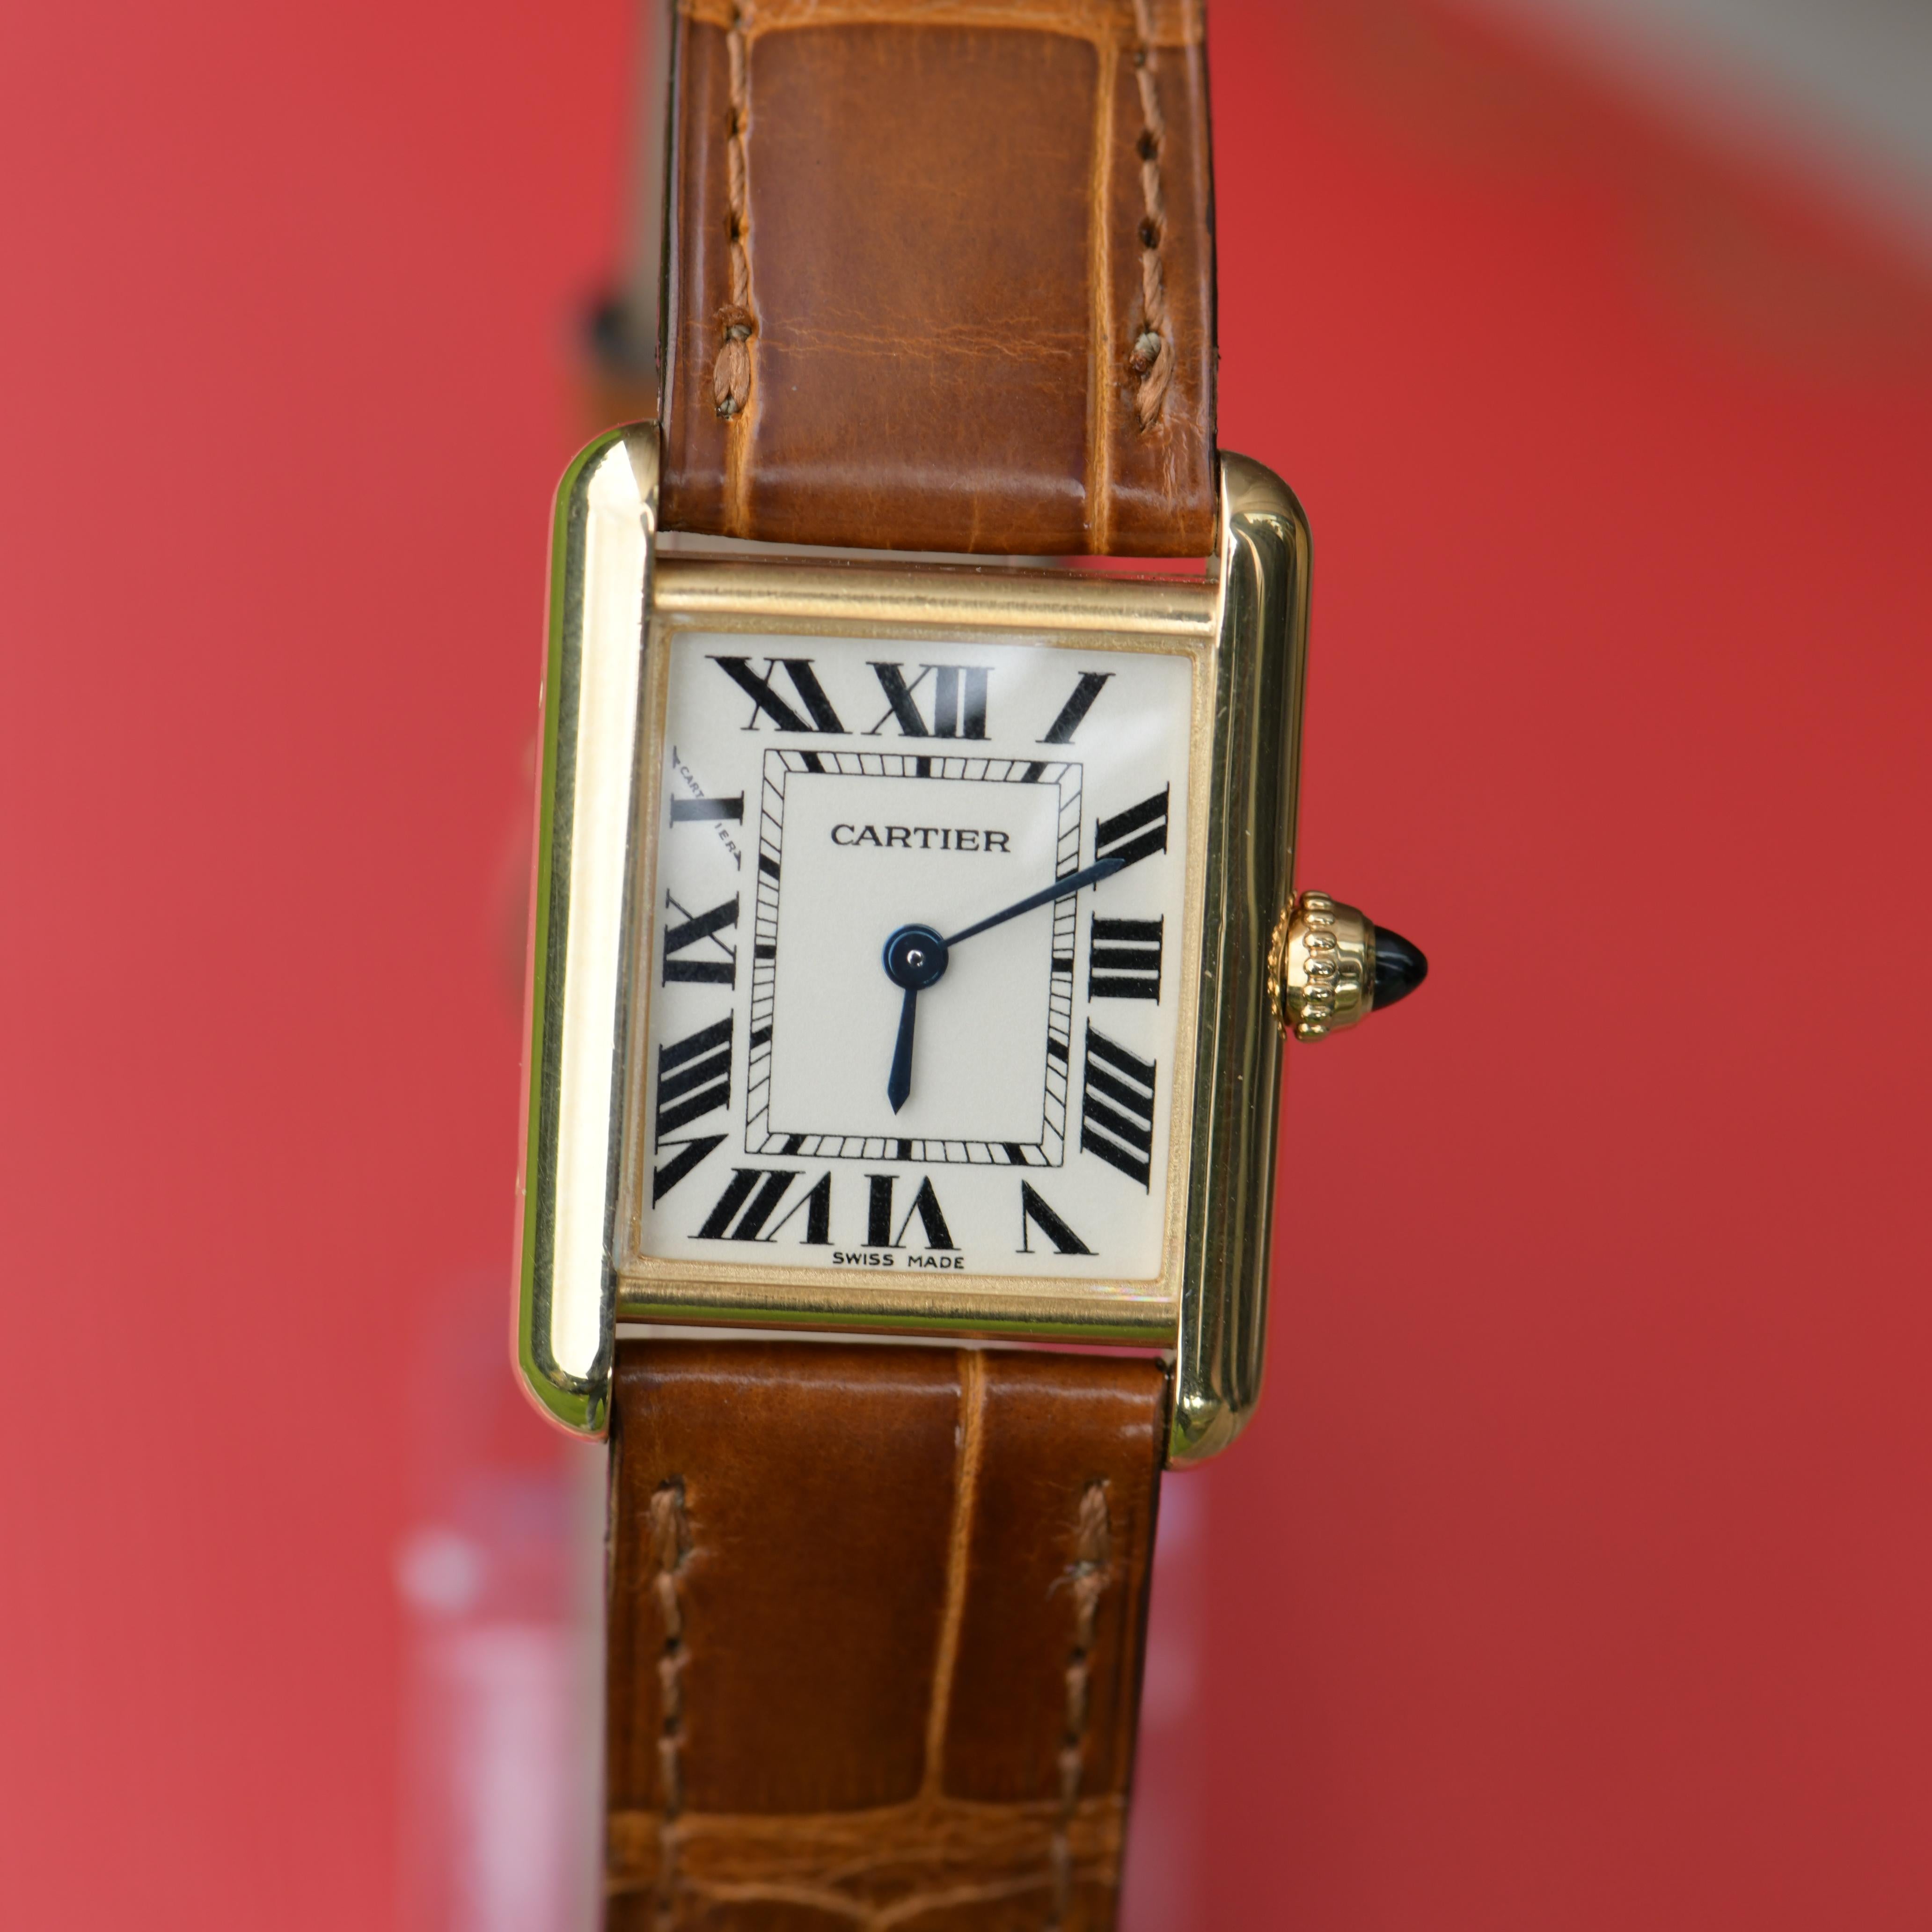 Dandelion Antiques Code	  AT-0709
Brand	                                  Cartier
Model No.	                          W1529856
Retail Price                                £8,050 / $11200
____________________________________

Date	                   